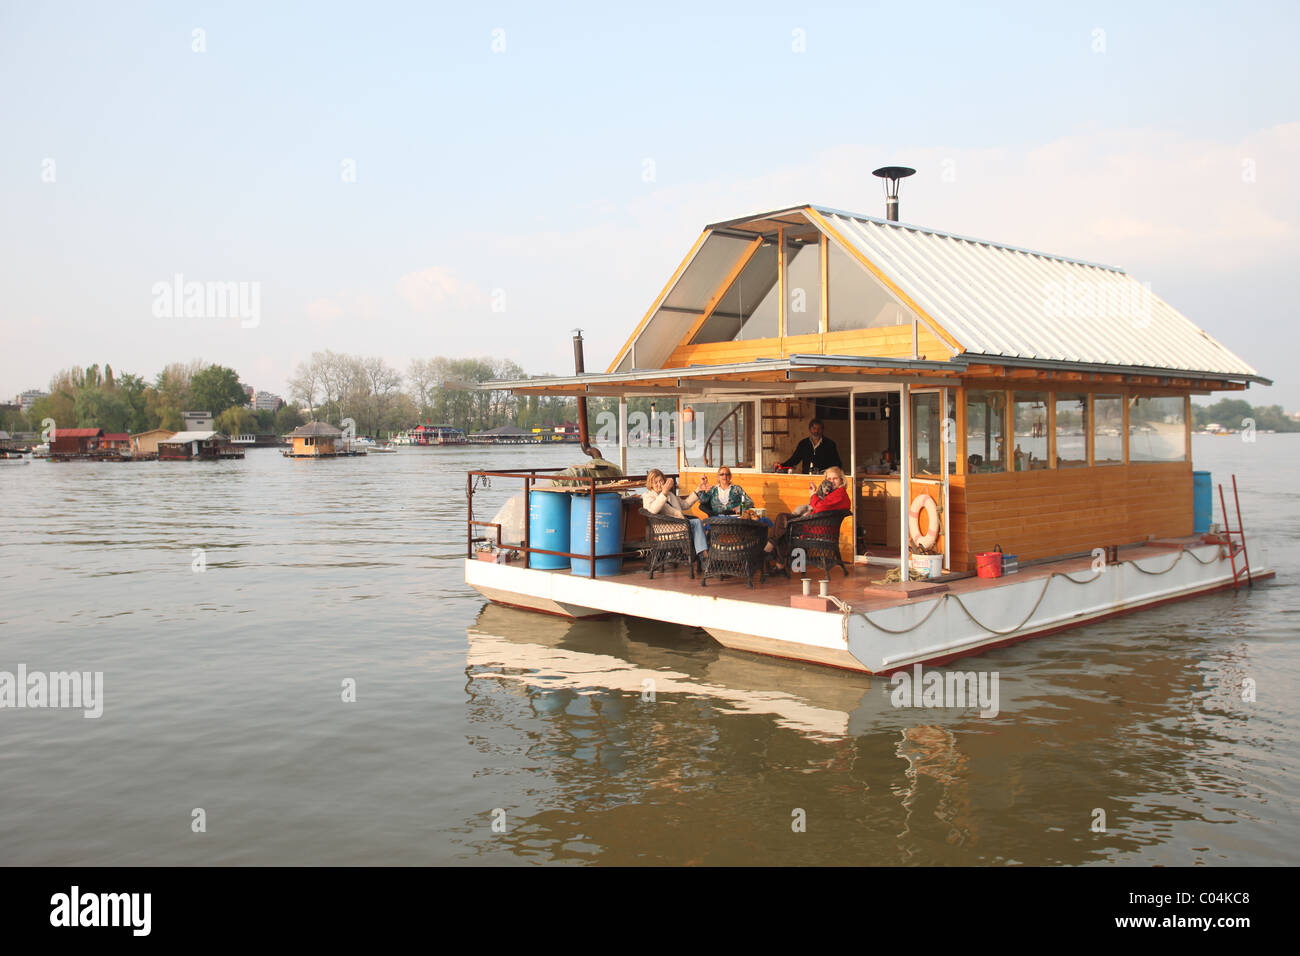 BELGRADE, SERBIA - APRIL 17 : Belgradians enjoying a weekend lunch on their private house boat on April 17, 2010. Houseboats Stock Photo